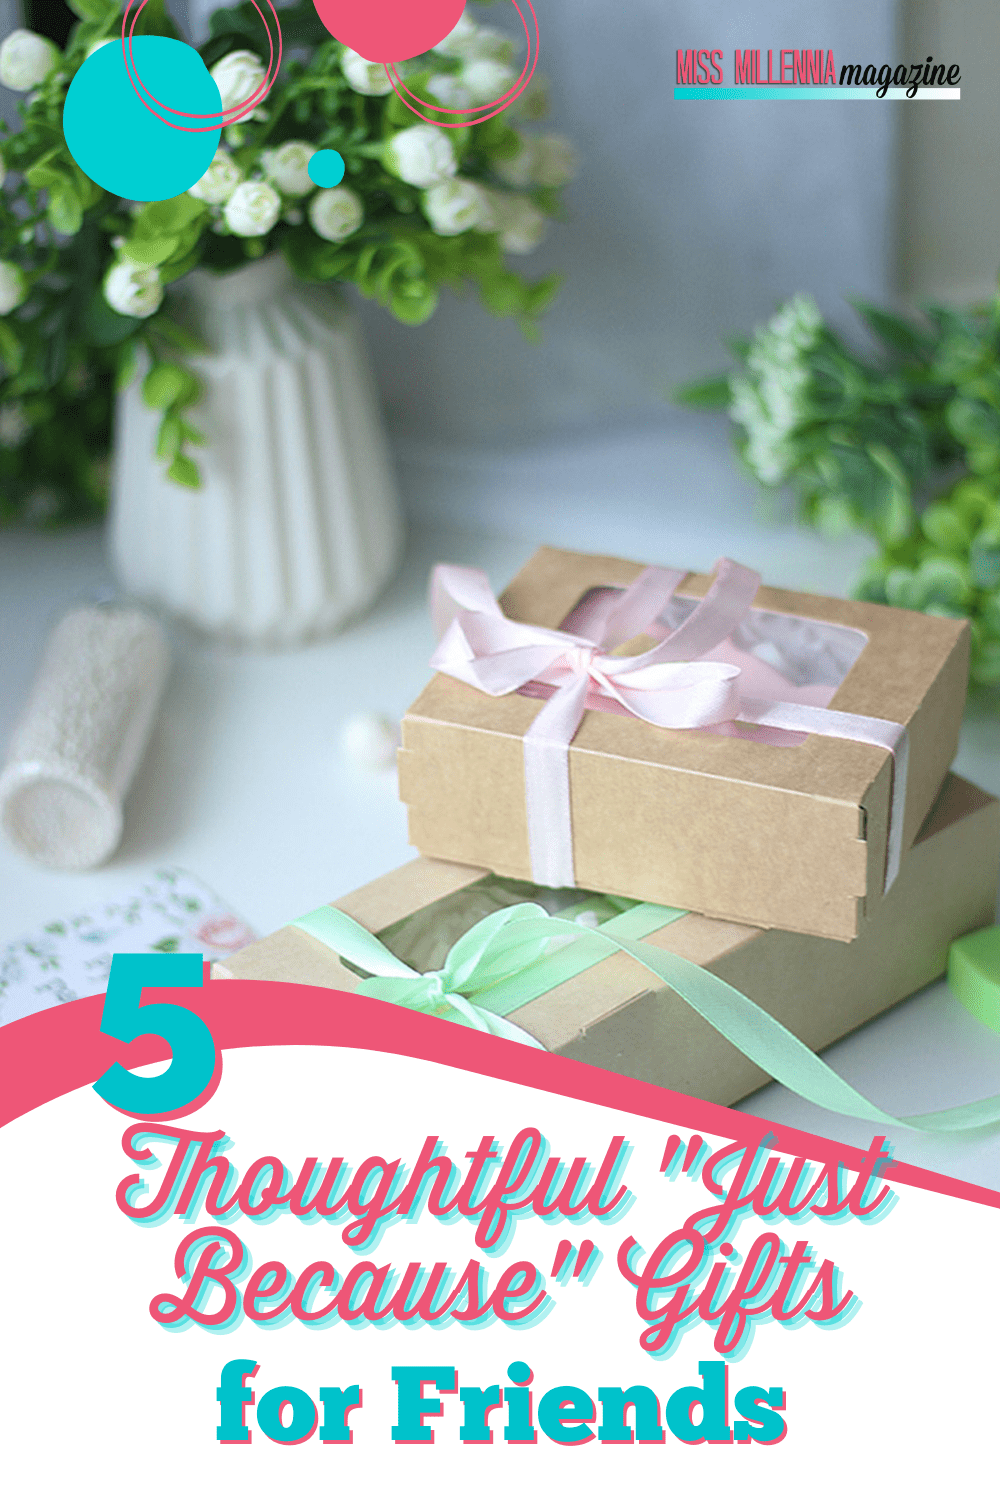 5 Thoughtful “Just Because” Gifts for Friends